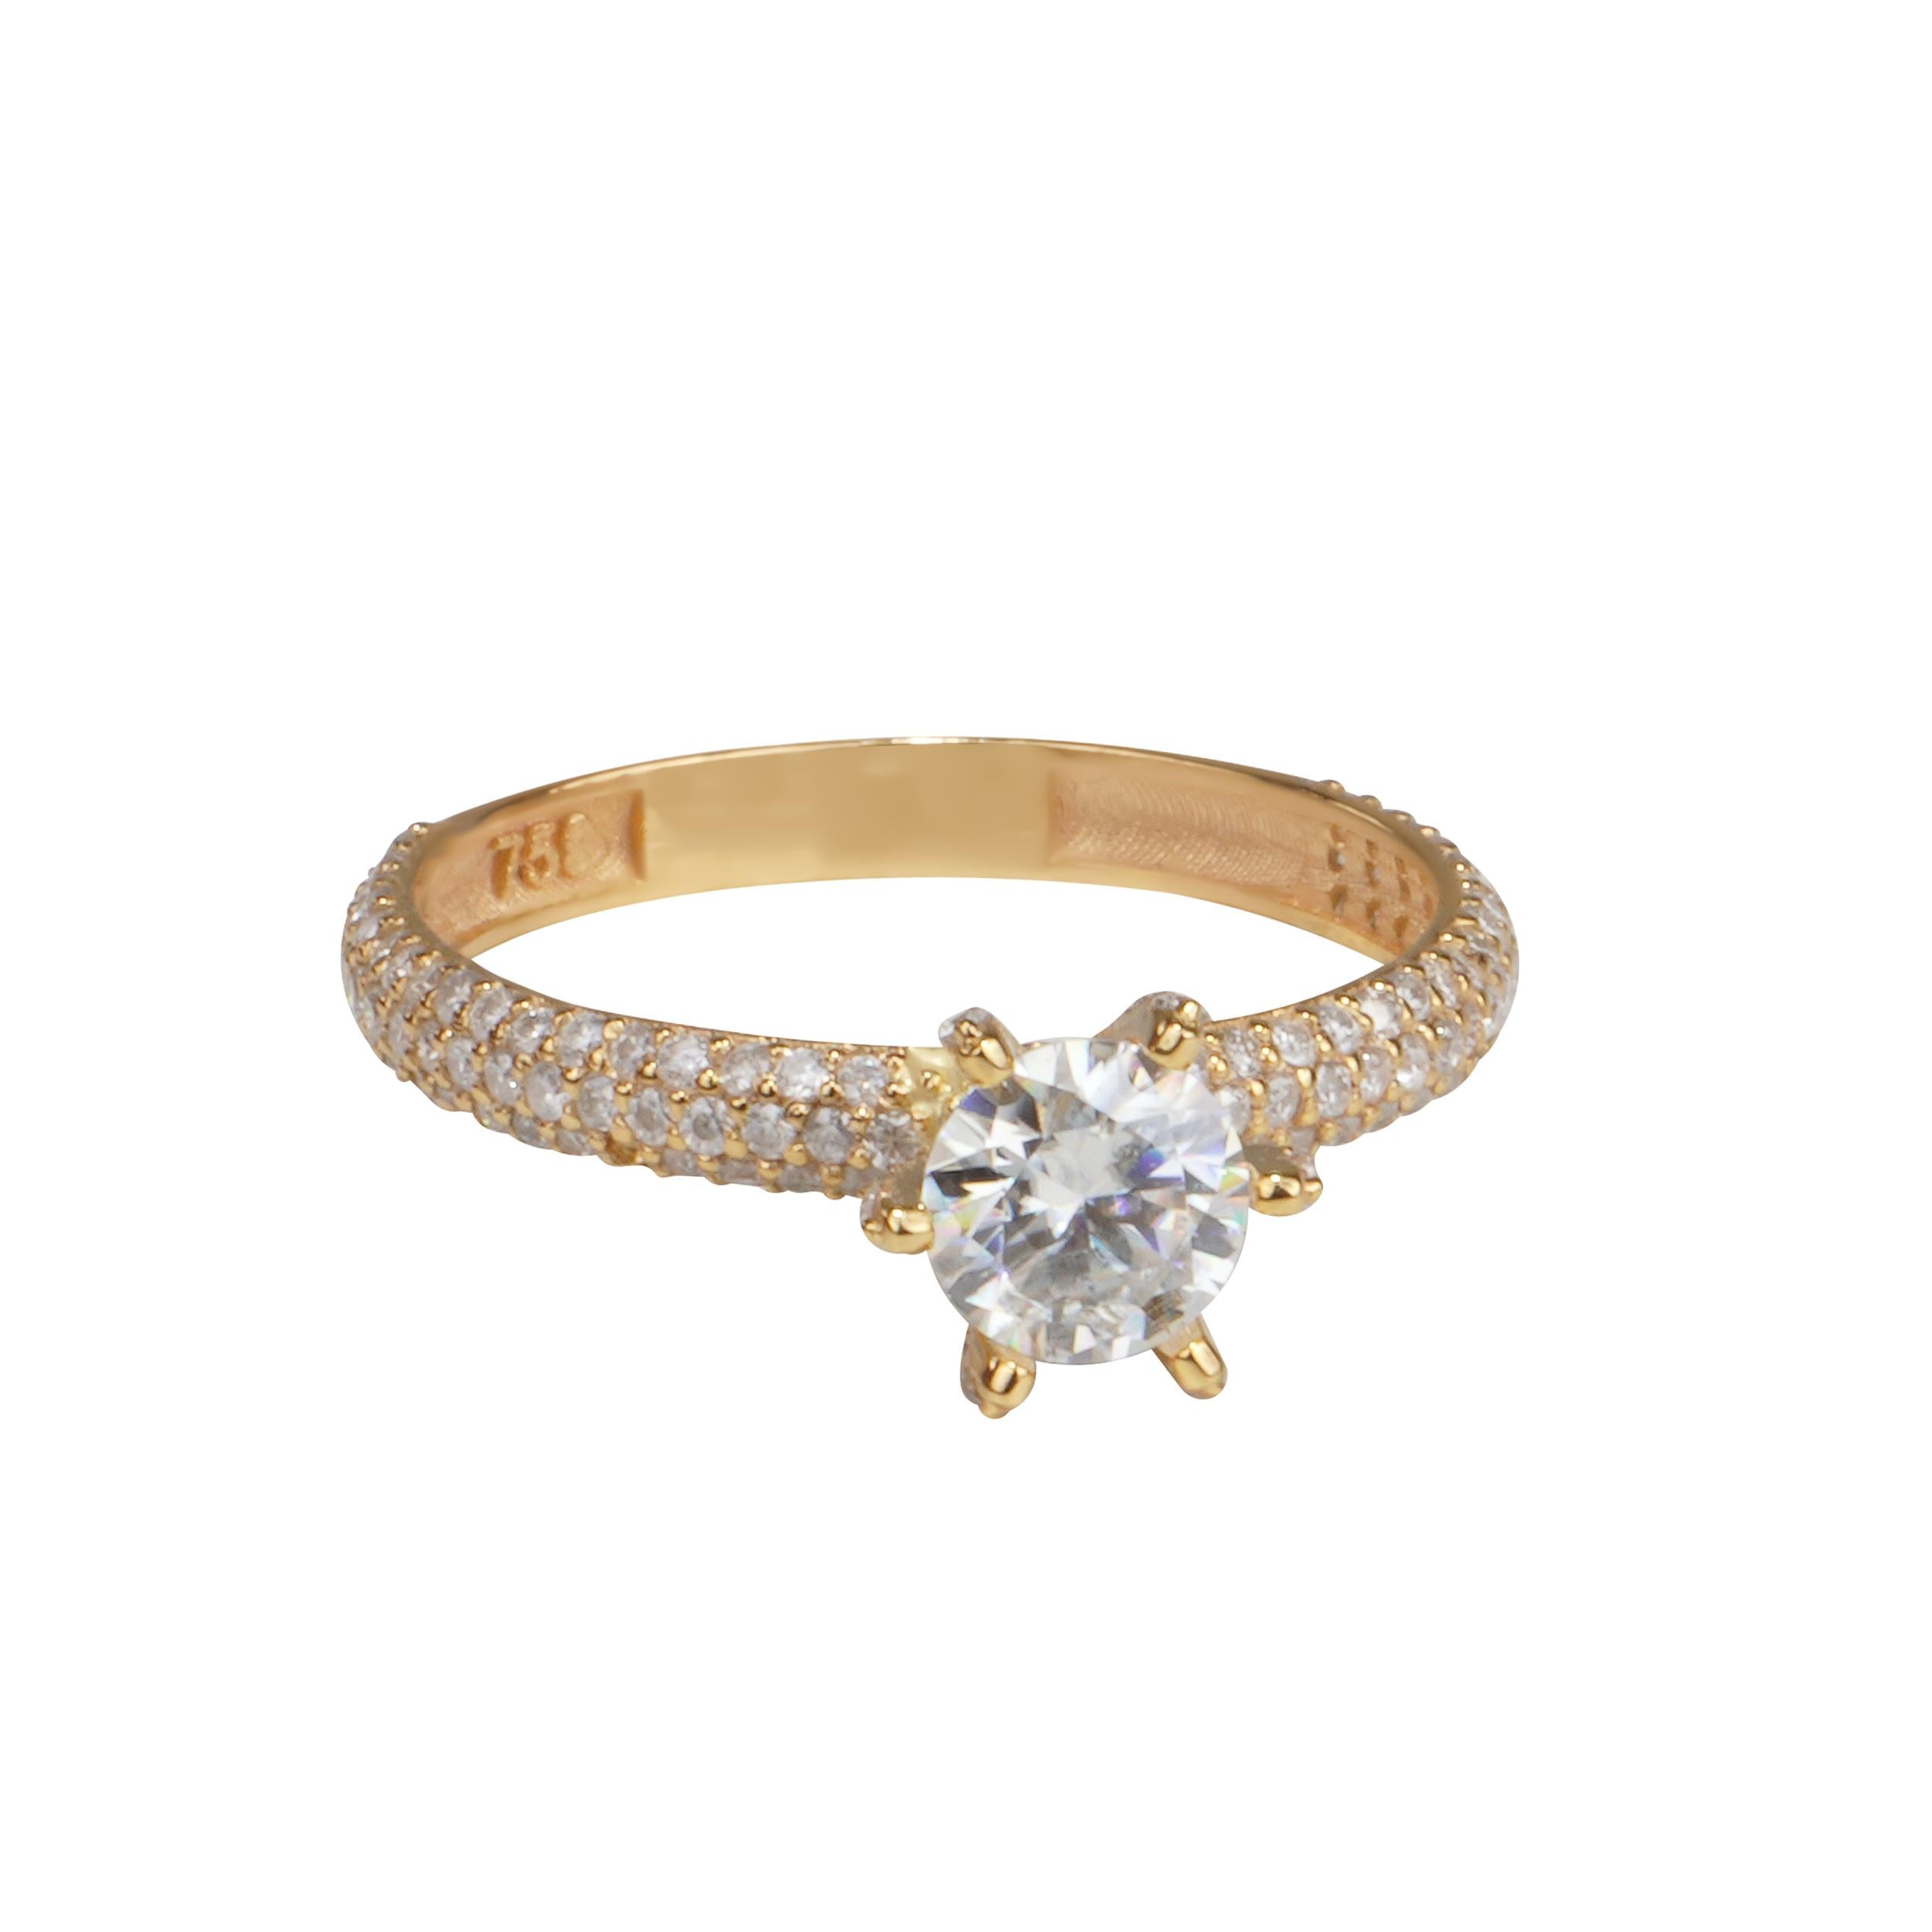 Elizabet Ring: A Sparkling Symbol of Love
If you are looking for a dazzling and meaningful gift for your loved one, you will love the Elizabet ring, a stunning piece of jewelry that showcases the beauty and brilliance of moissanite.

The Elizabet